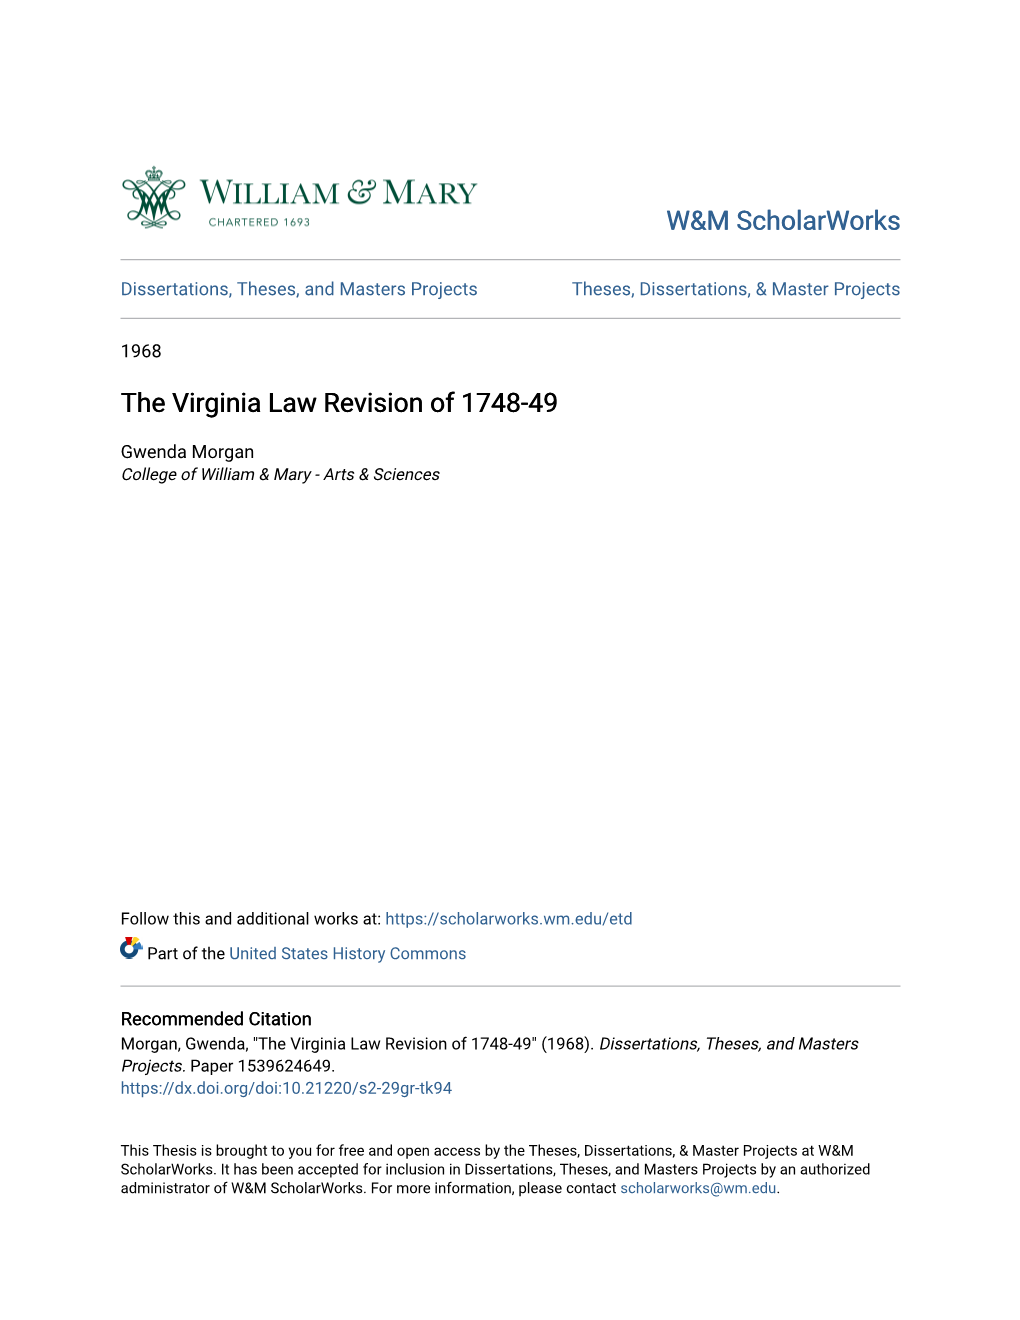 The Virginia Law Revision of 1748-49